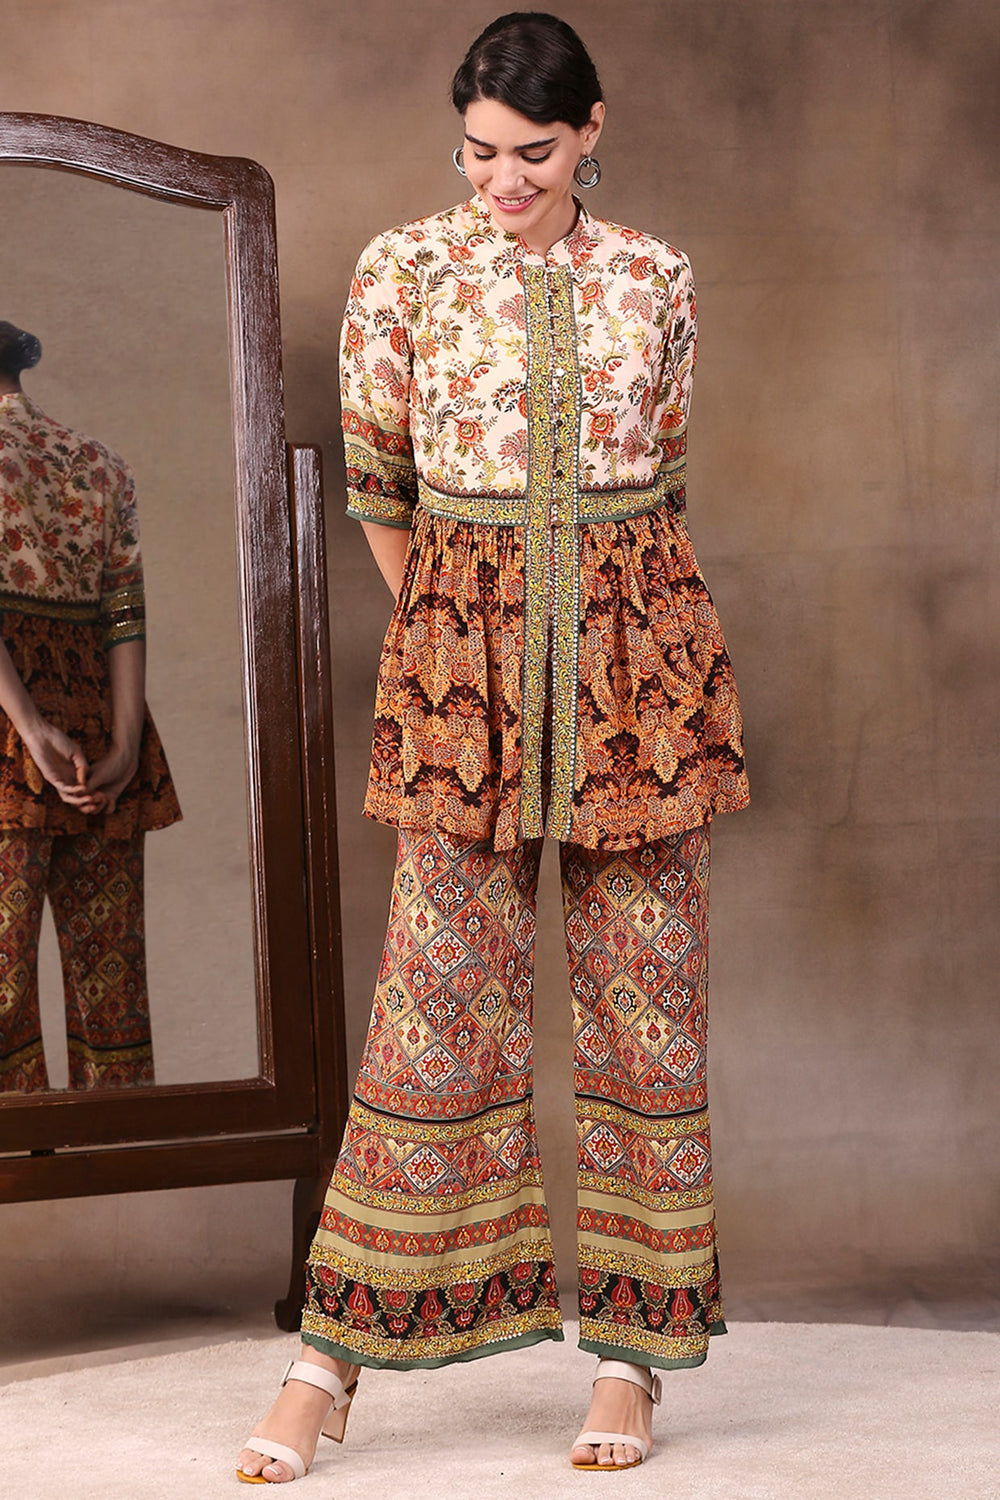 Ethnic Folklore Printed Peplum Style Top With Pants